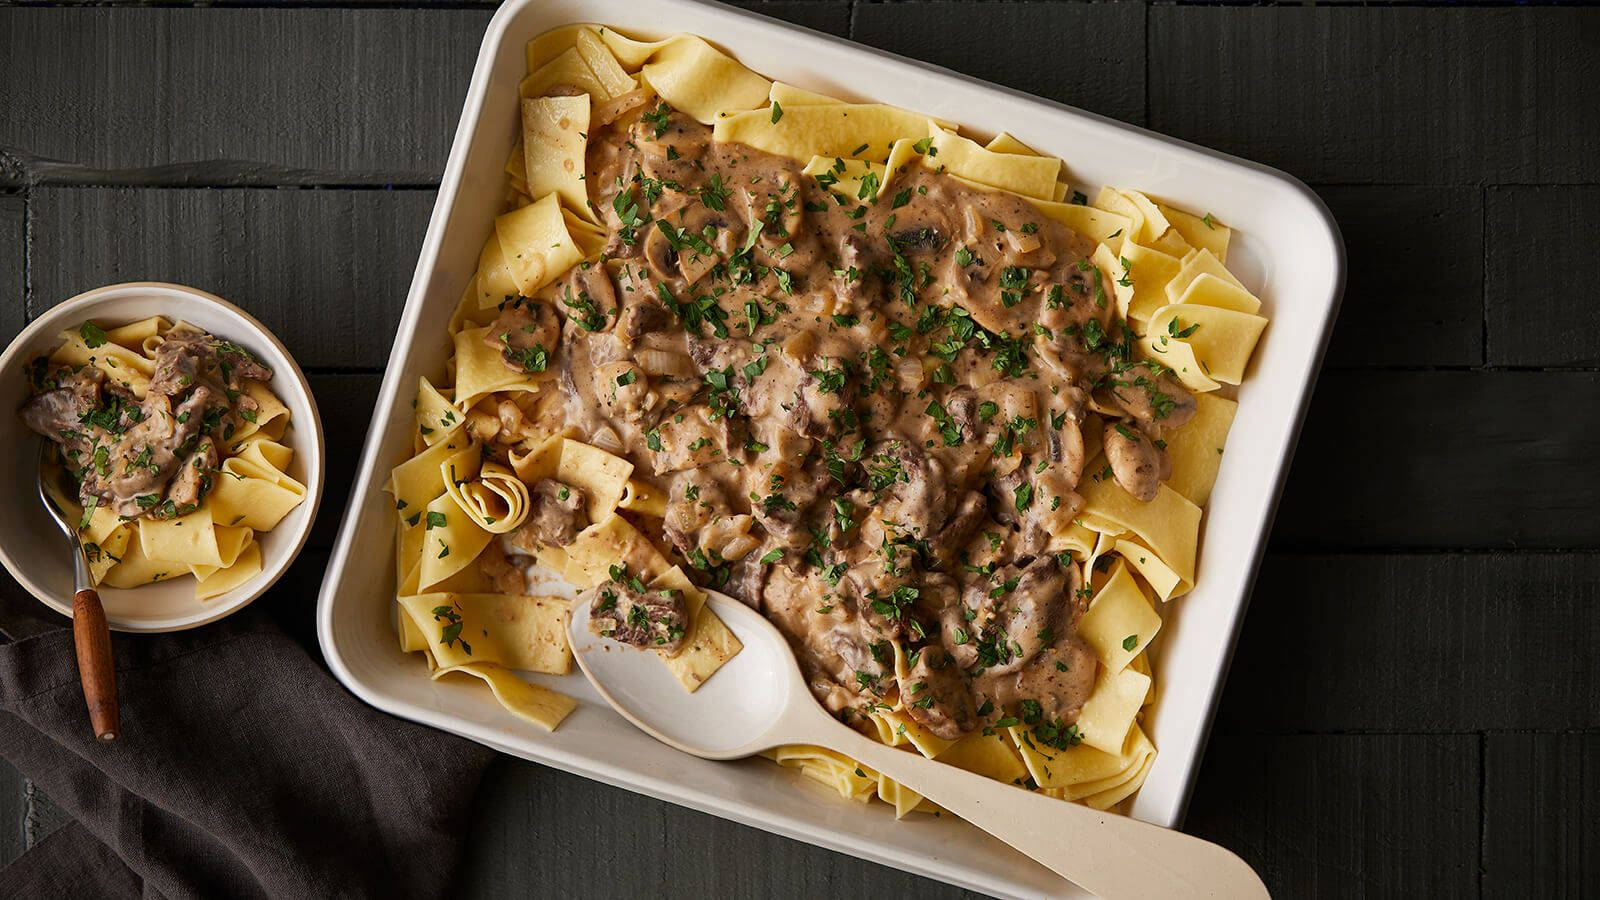 A Sumptuous Serving of Beef Stroganoff with Pappardelle Pasta Wallpaper